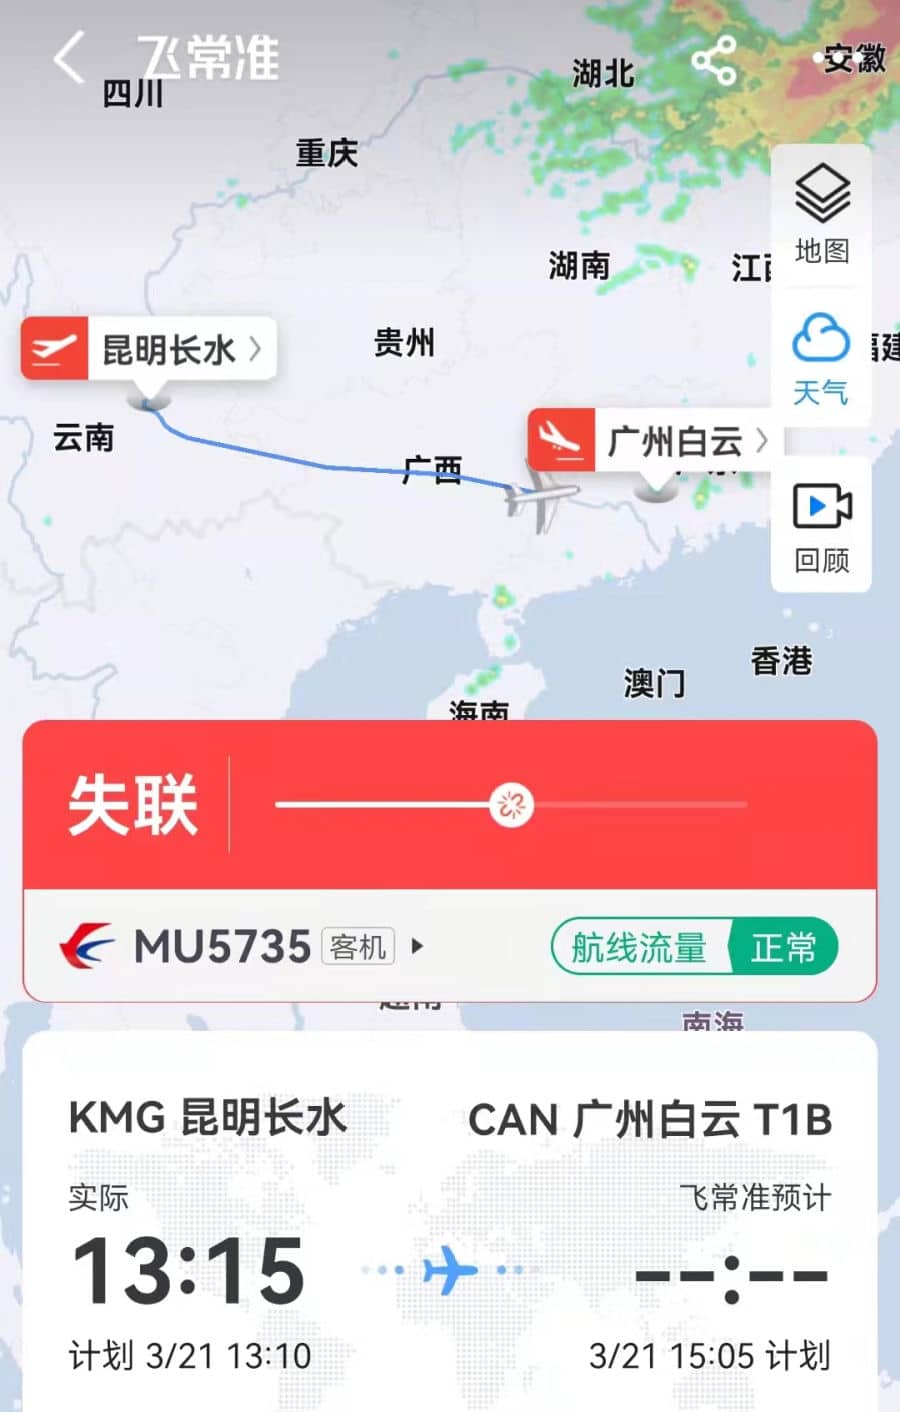 MU5735 on Weibo: China Eastern Airlines Flight Crashes in Guangxi